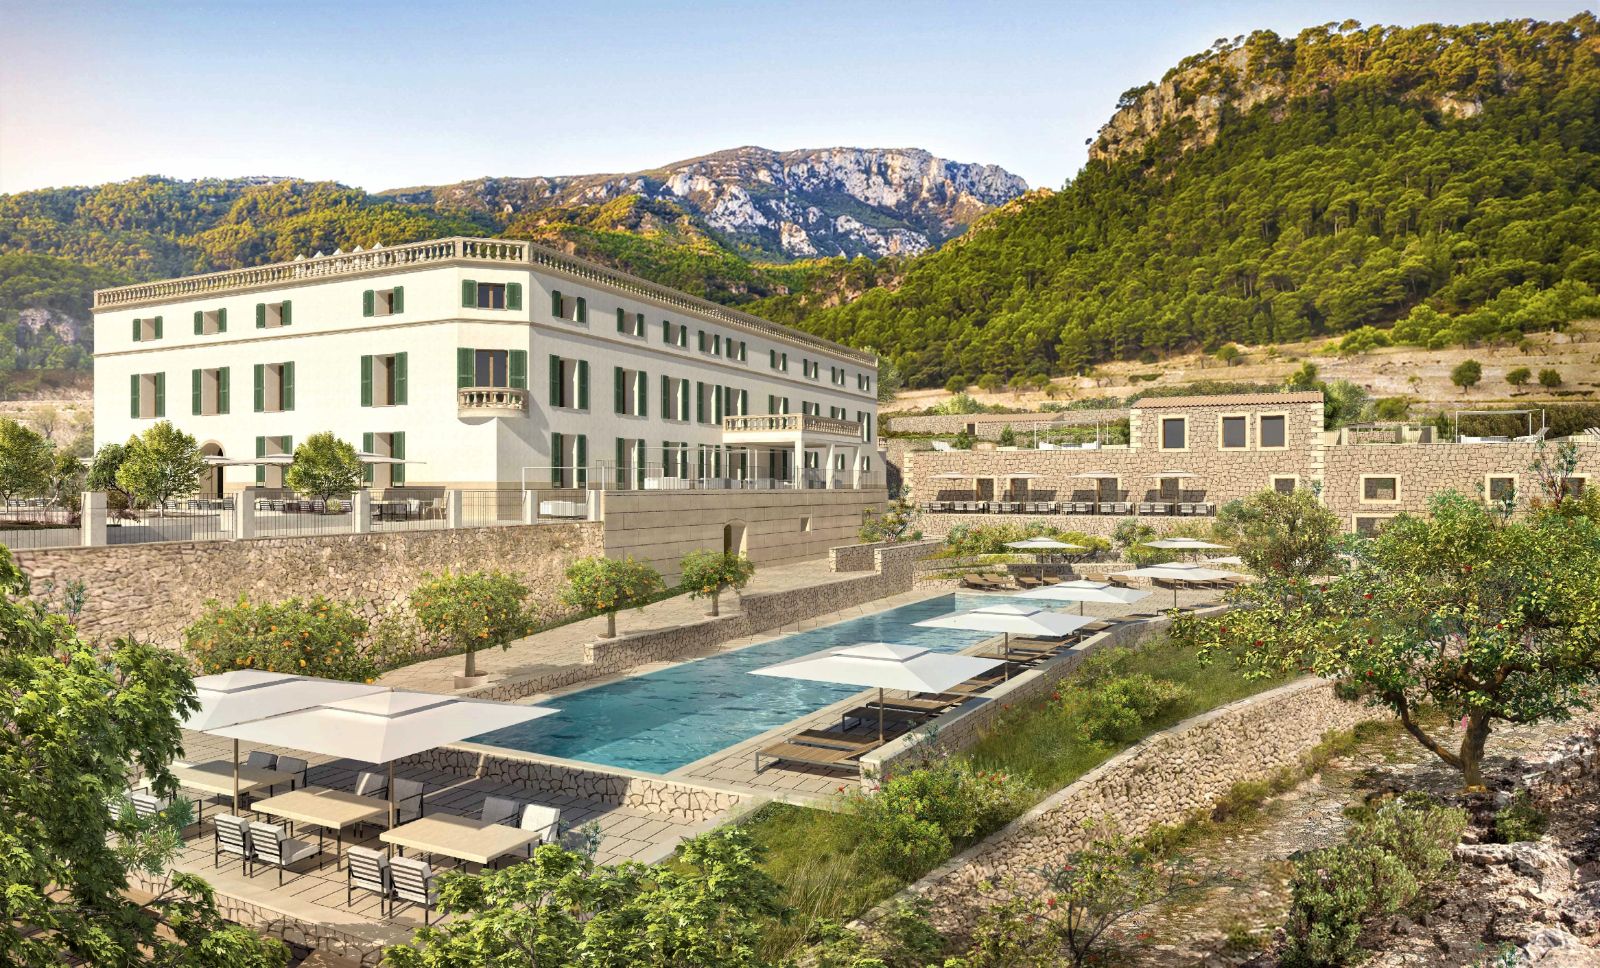 Exterior and pool view of Son Bunyola in Mallorca